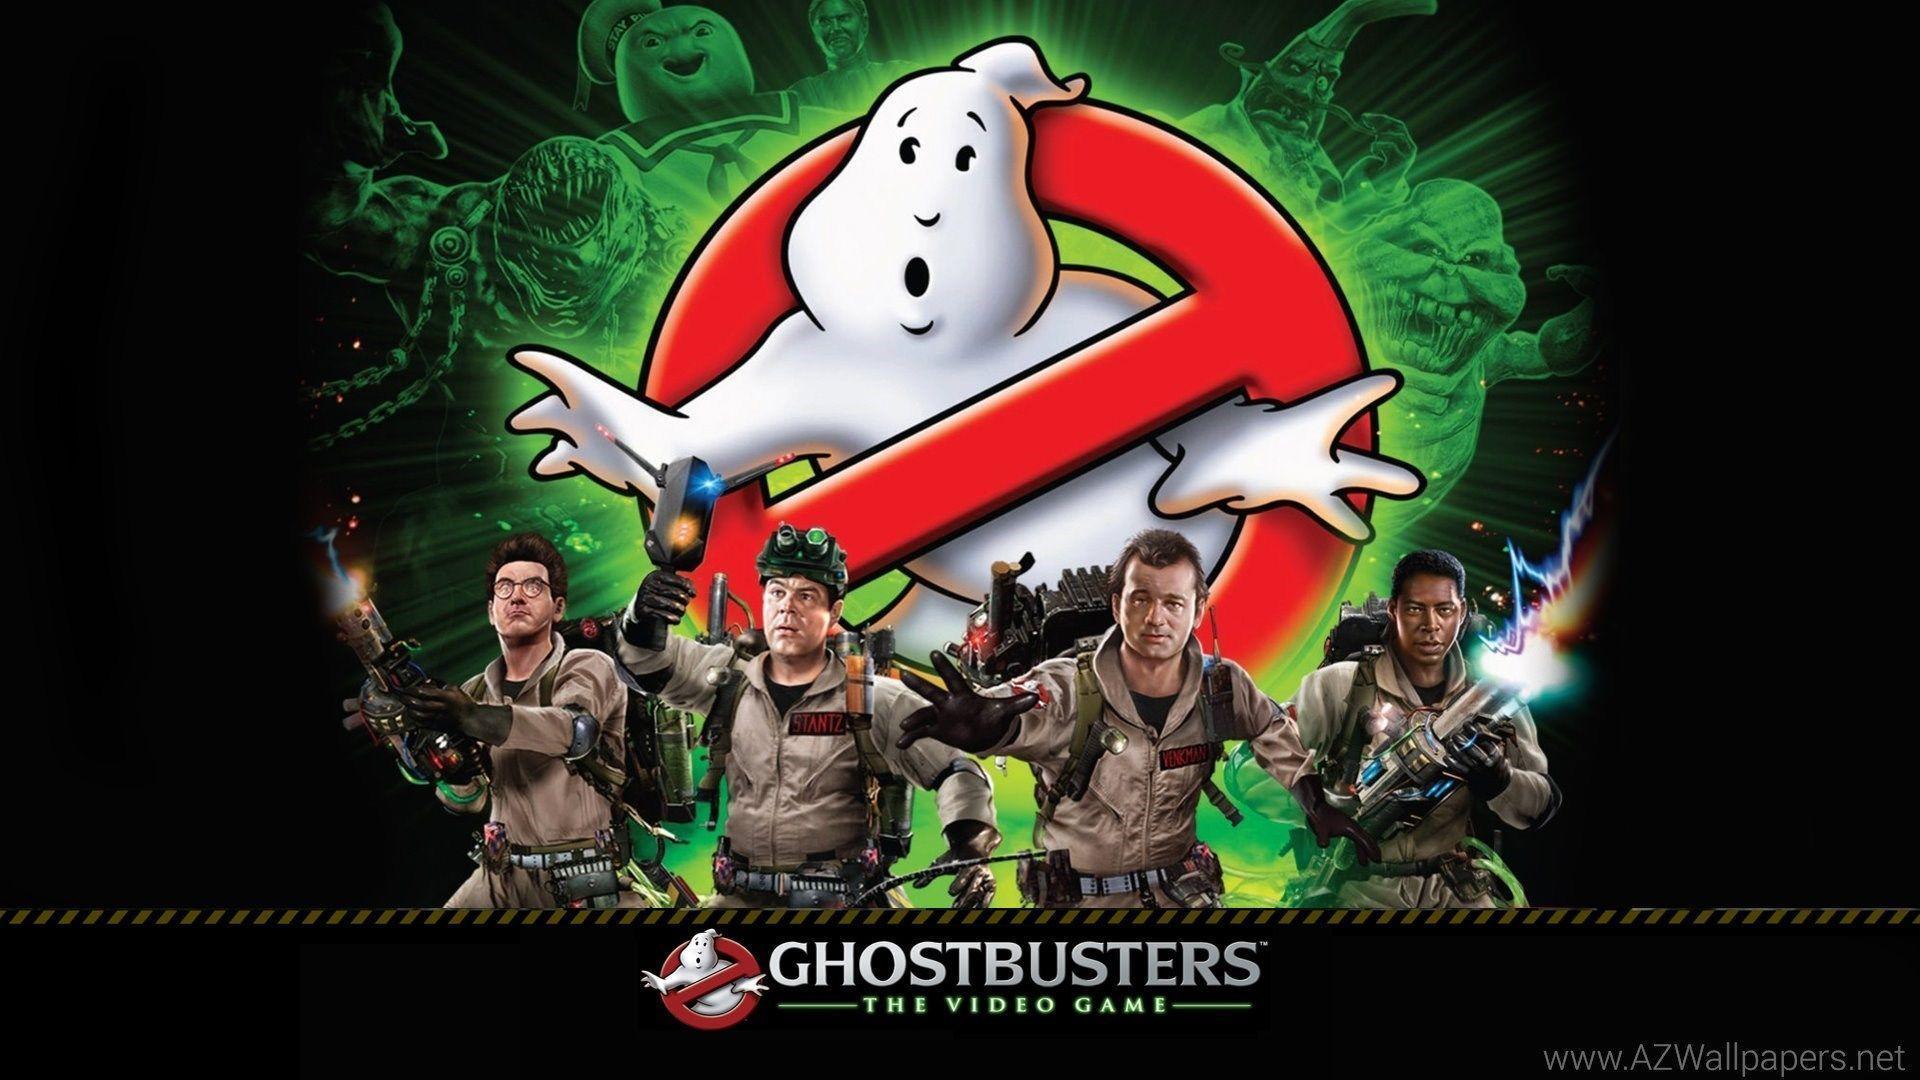 Ghostbusters Wallpaper HD Wallpaper Background Of Your Choice